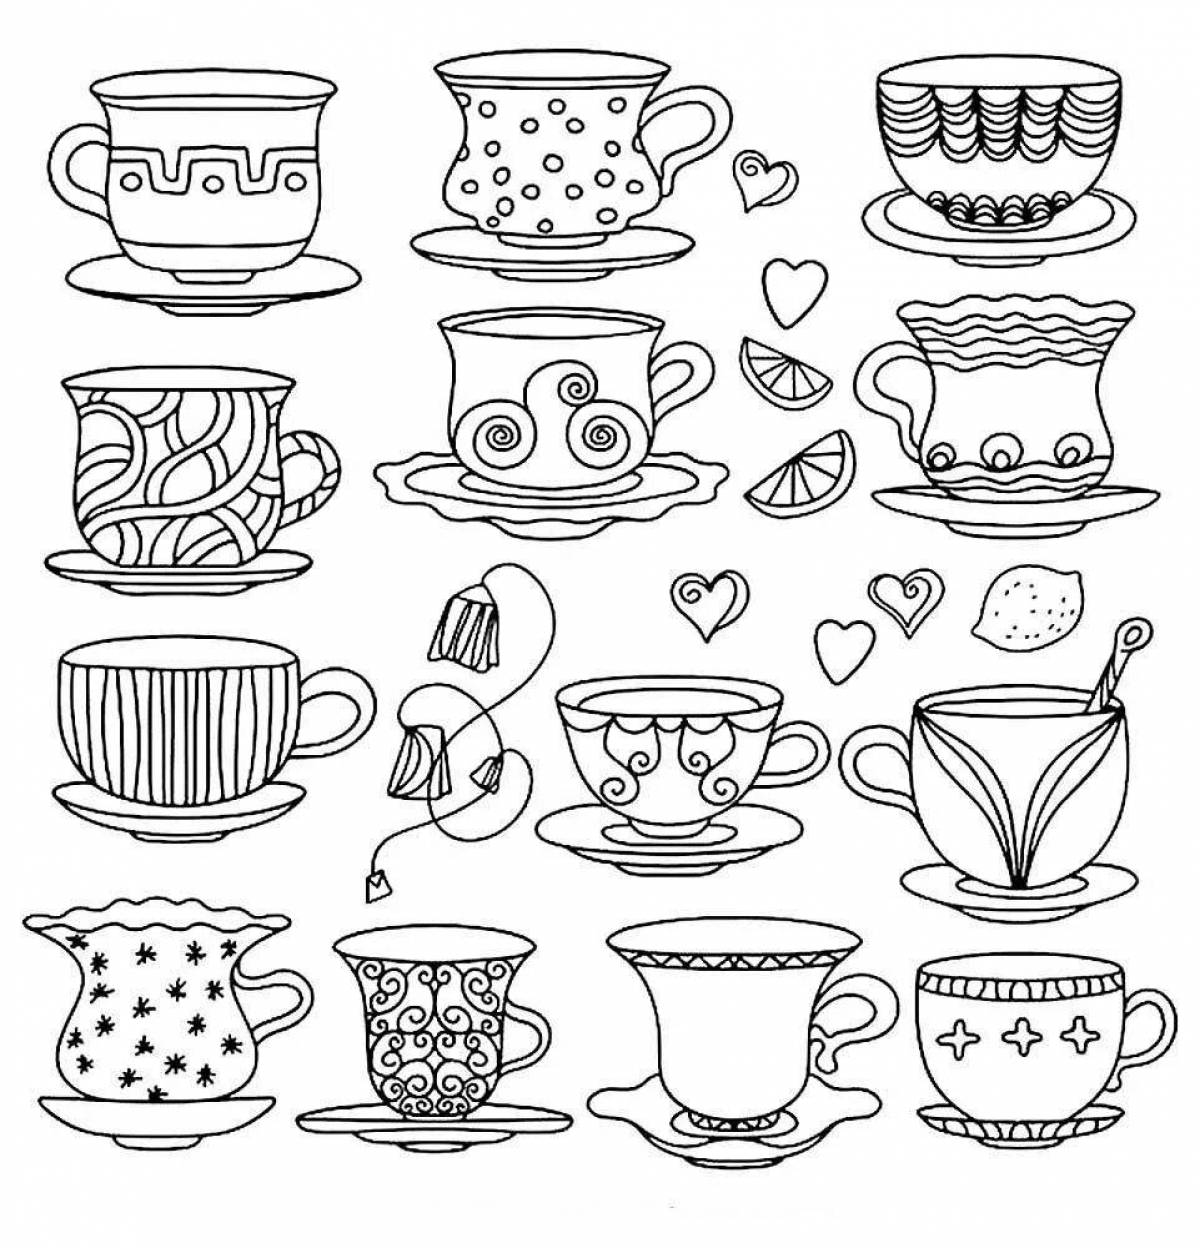 Colouring funny mugs and cups